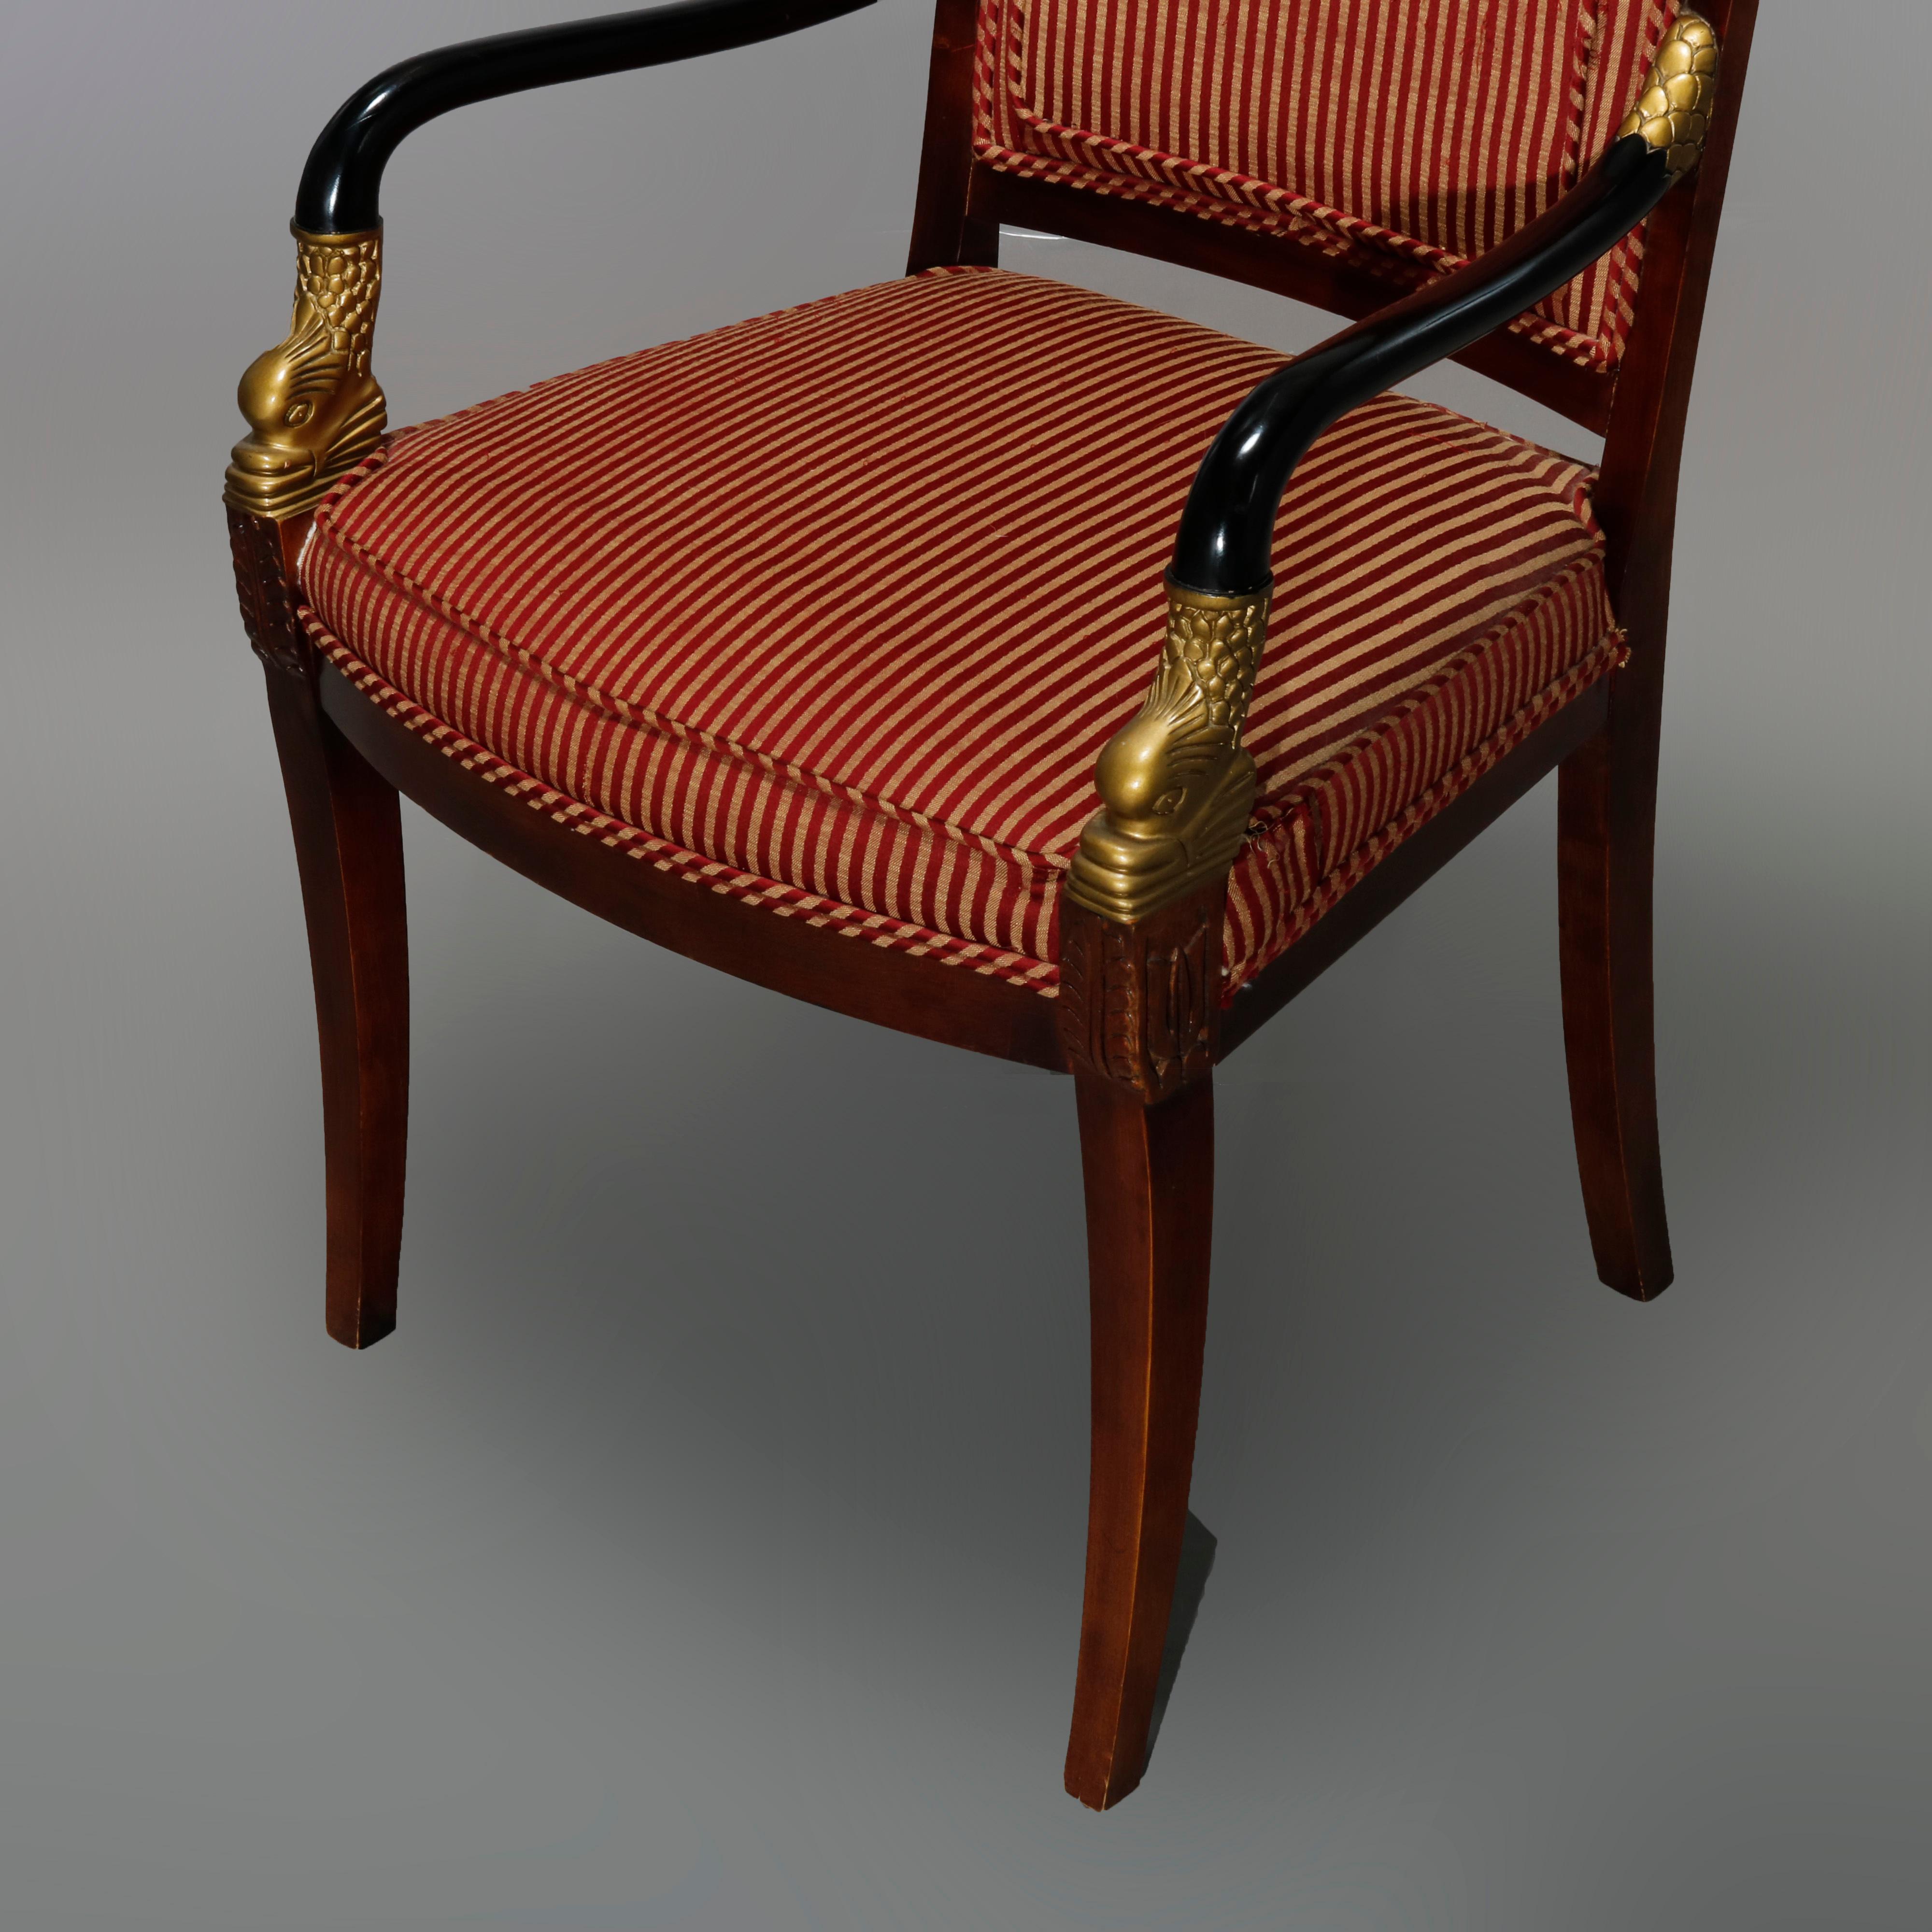 French Empire Century Chair Co. Carved, Ebonized & Gilt Mahogany Dolphin Chairs 4